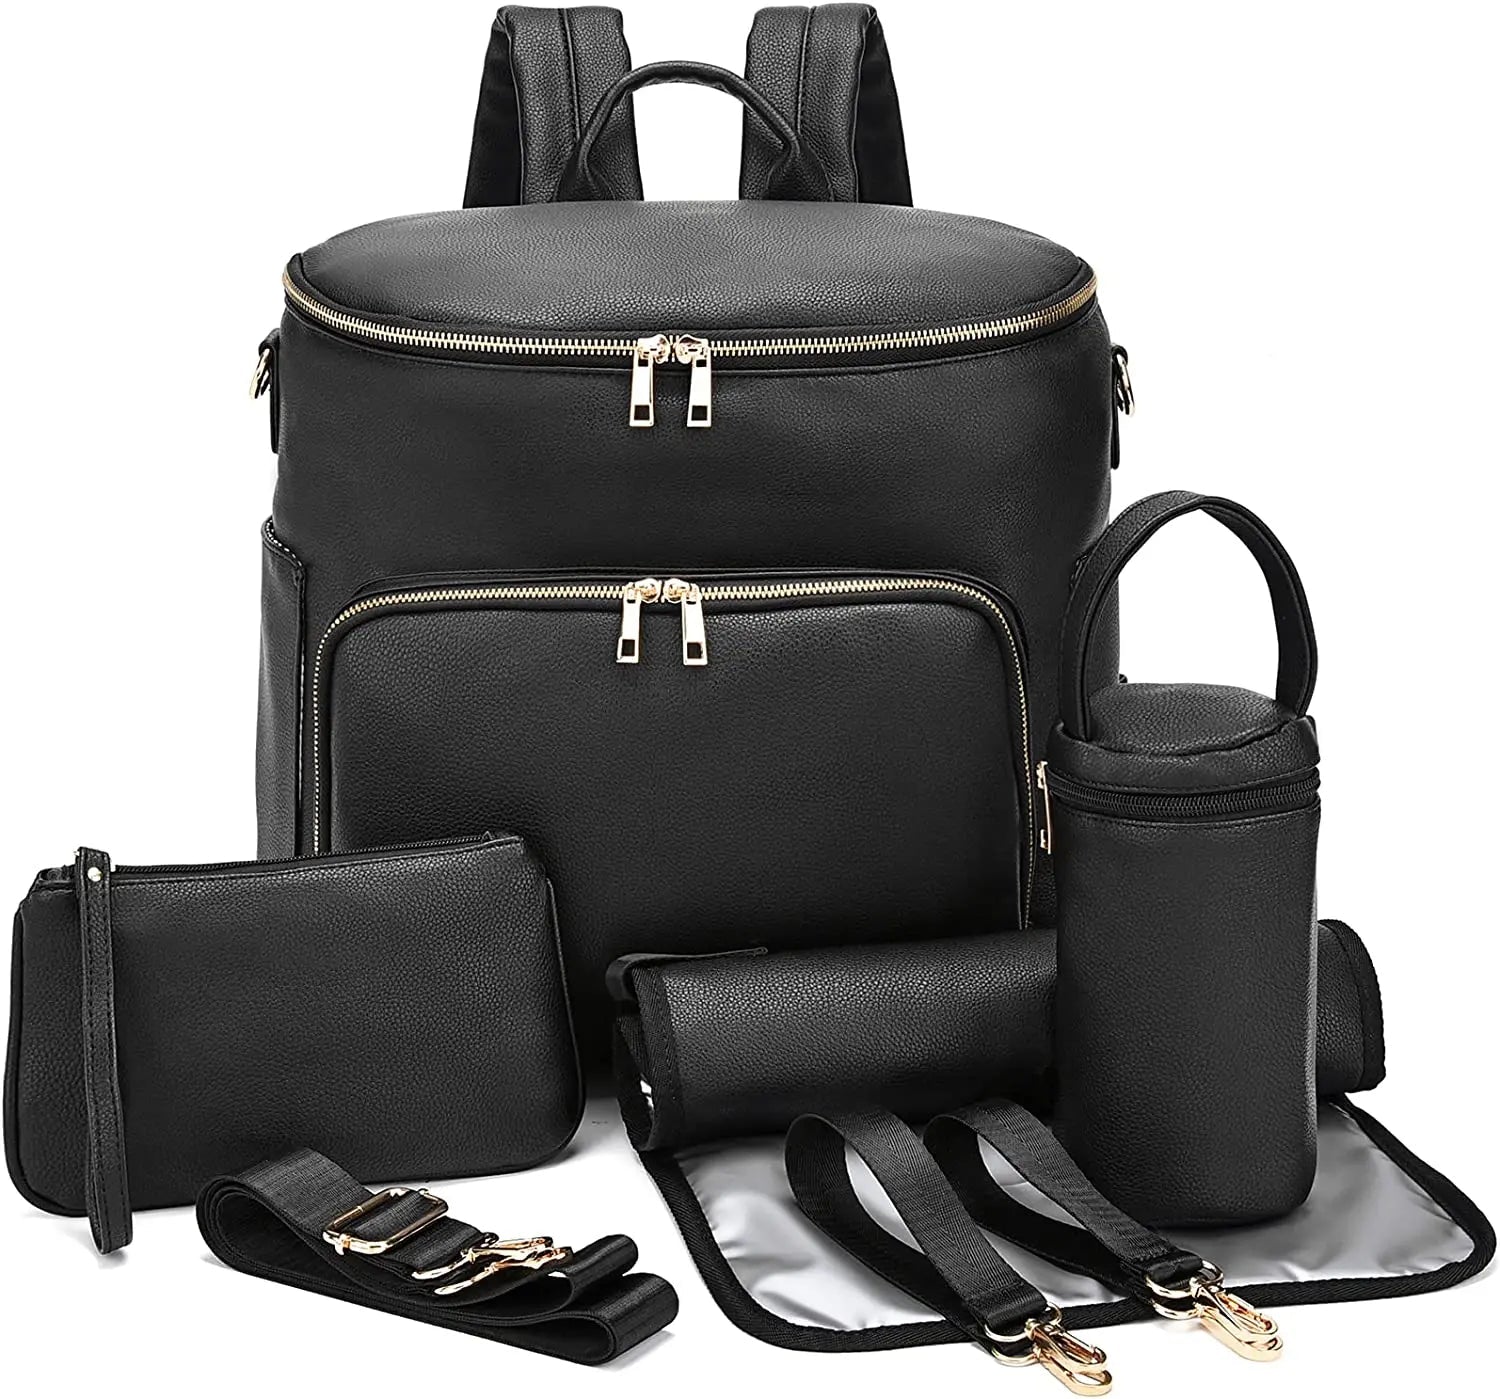 Black Faux Leather Diaper Backpack The Store Bags Black-b 